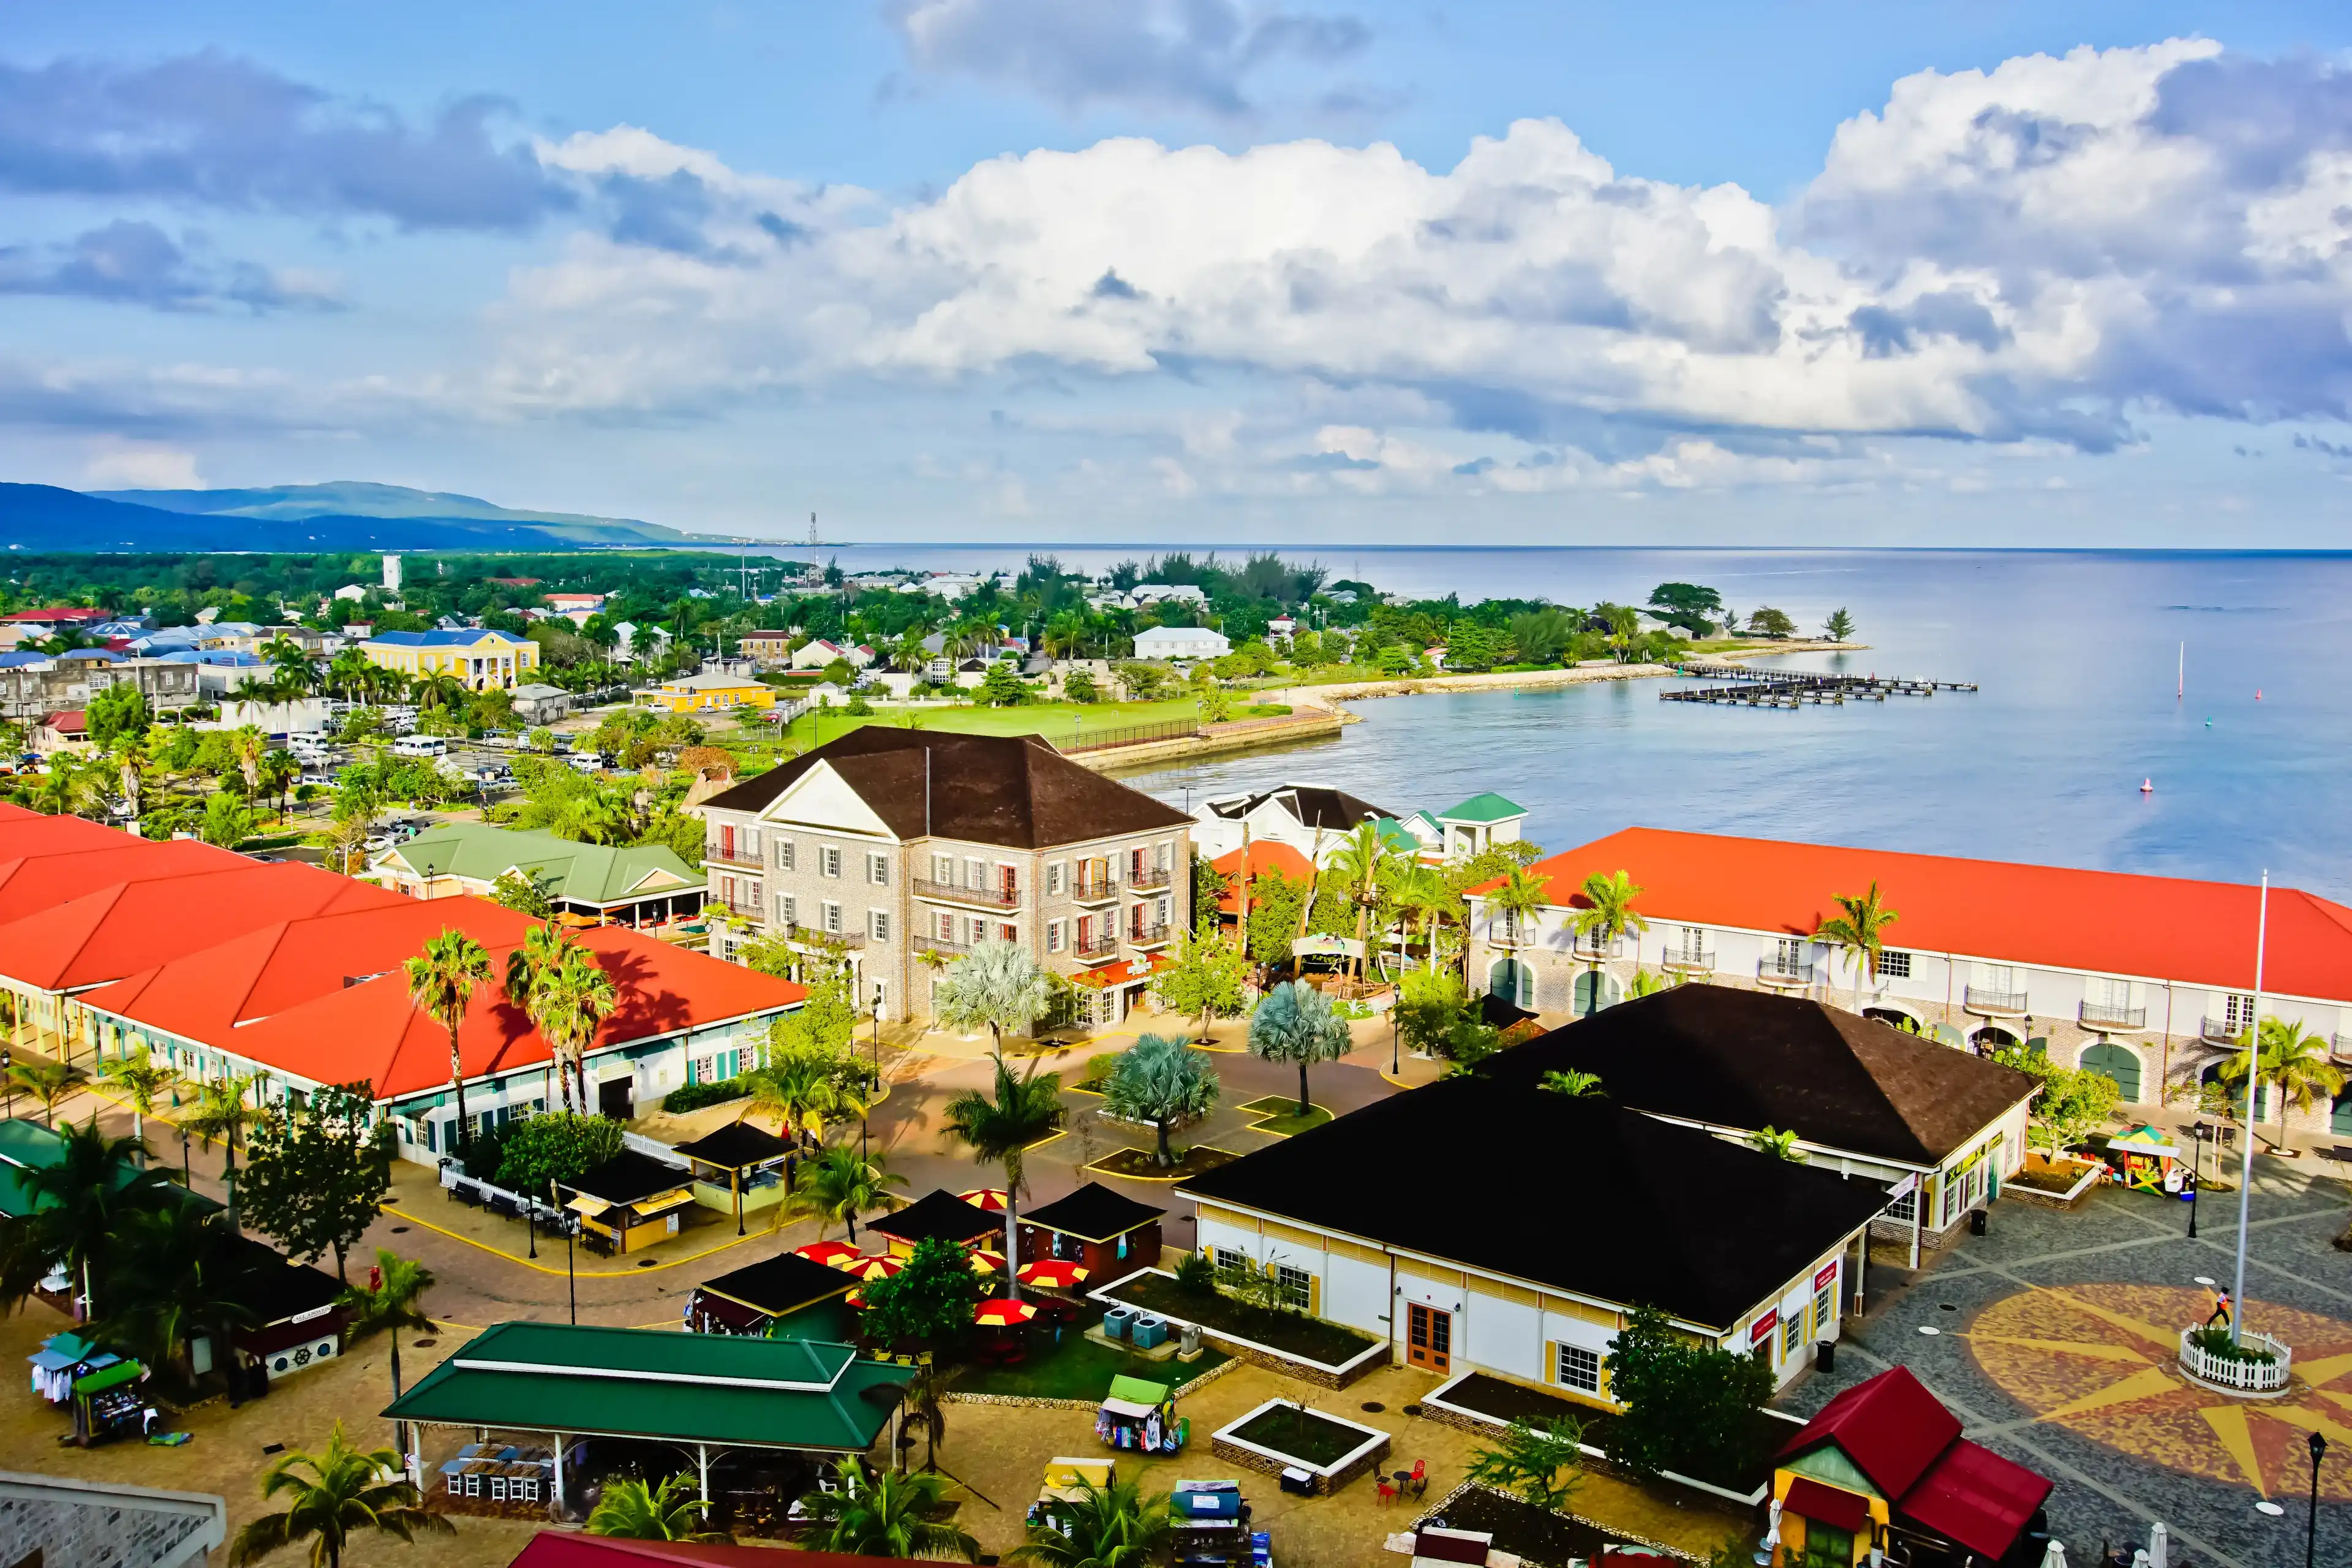 Falmouth, trelawny/Jamaica - 1/31/2019: aerial view of beautiful Georgian style city of Falmouth